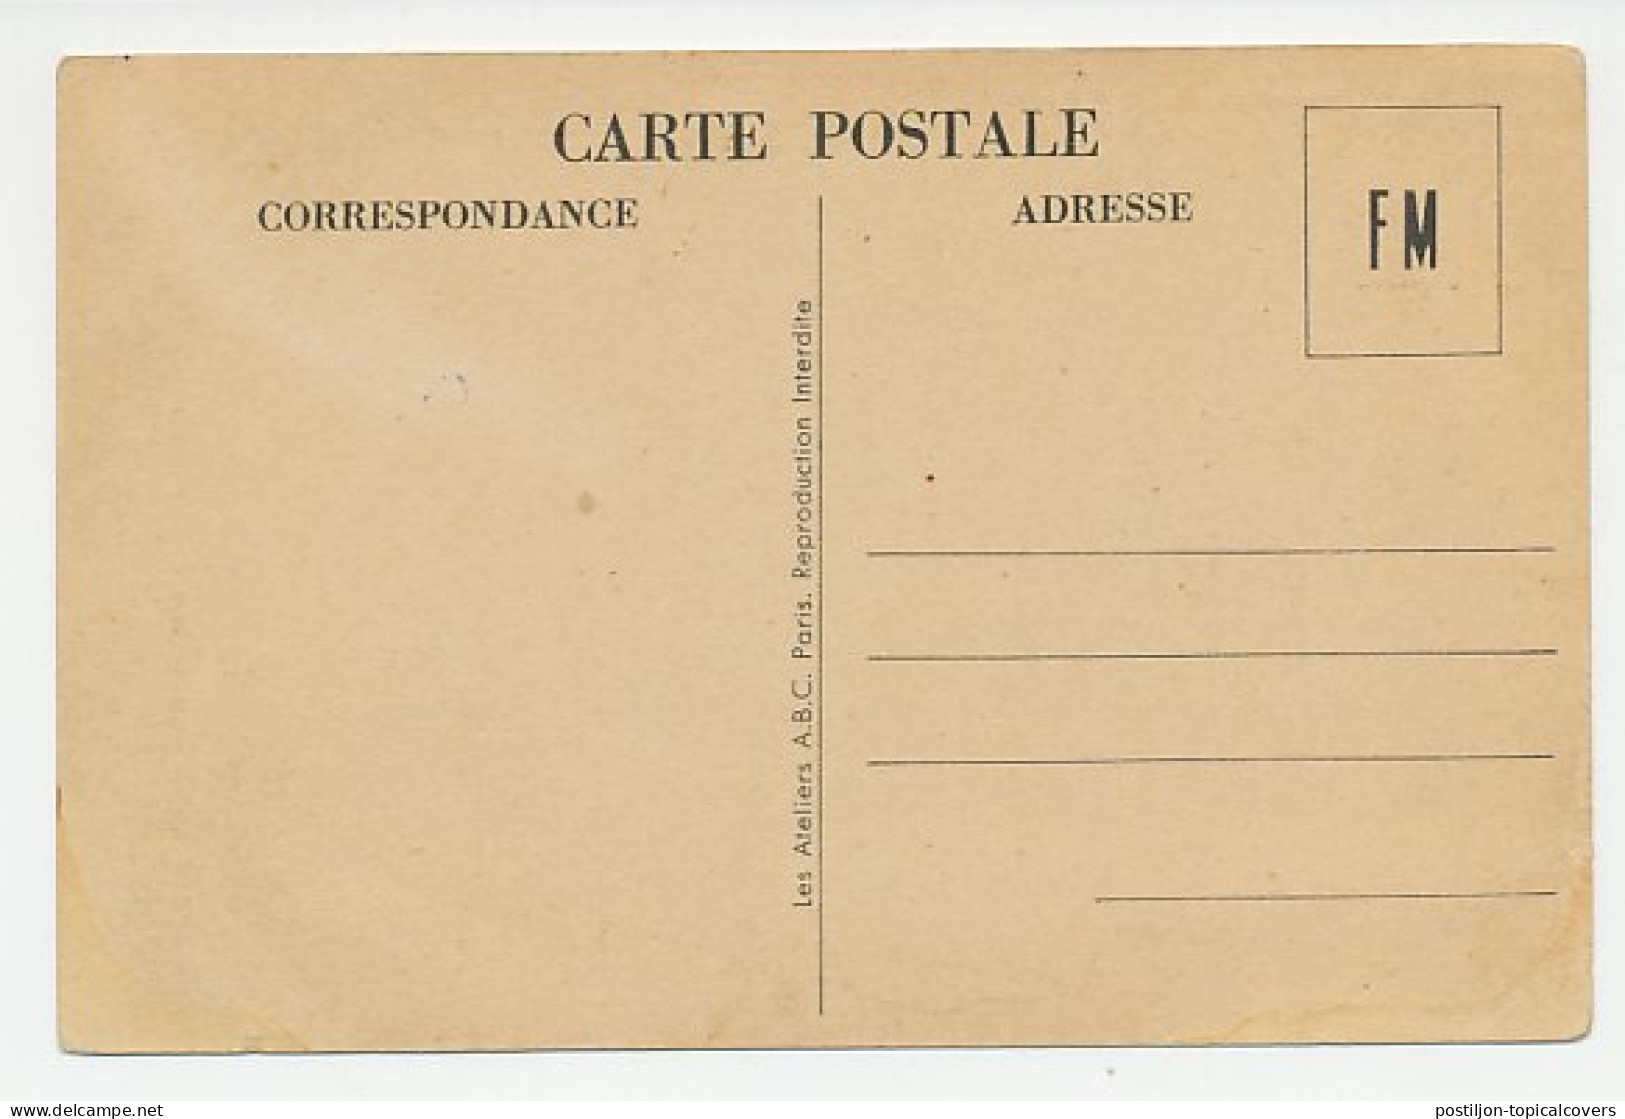 Military Service Card France Pipe Smoking - WWII - Tabaco